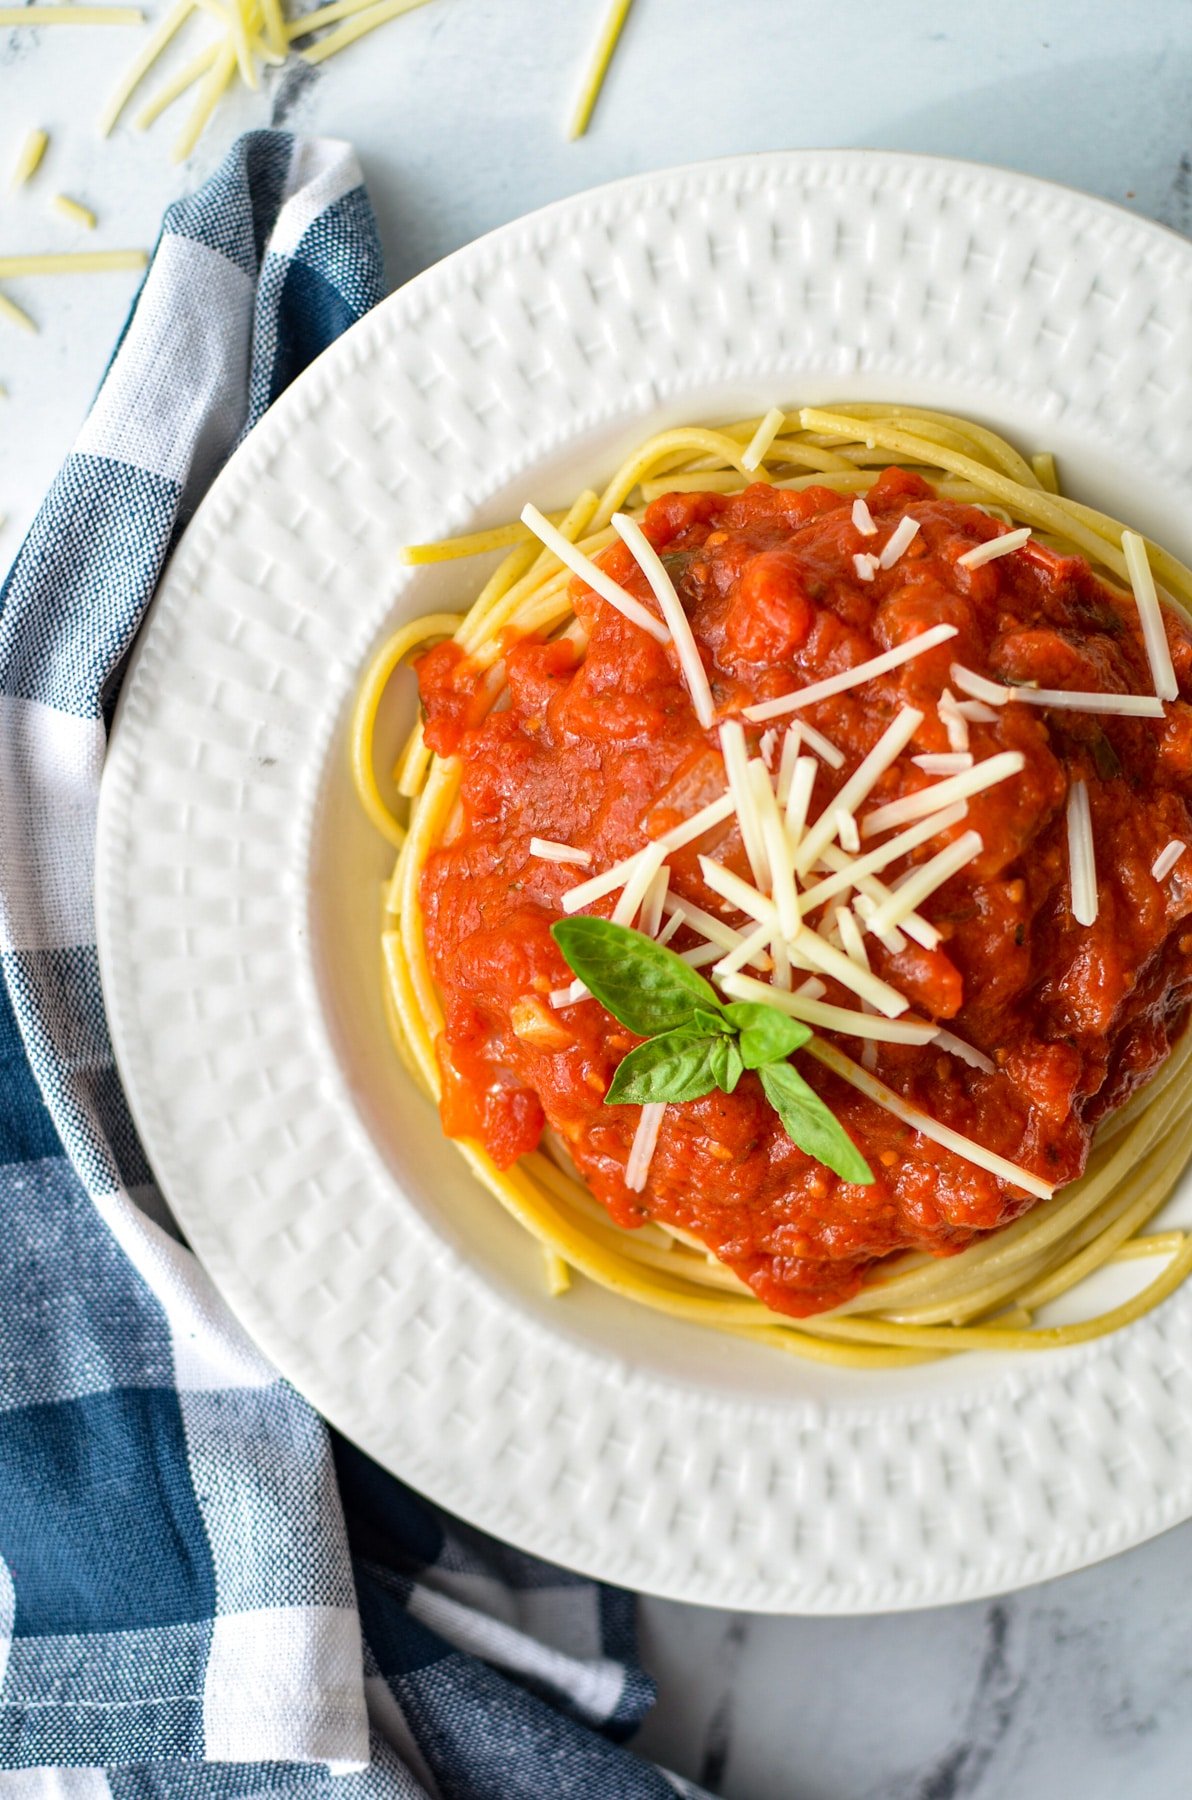 A bowl of spaghetti with marinara sauce, garnished with parmesan cheese and basil.